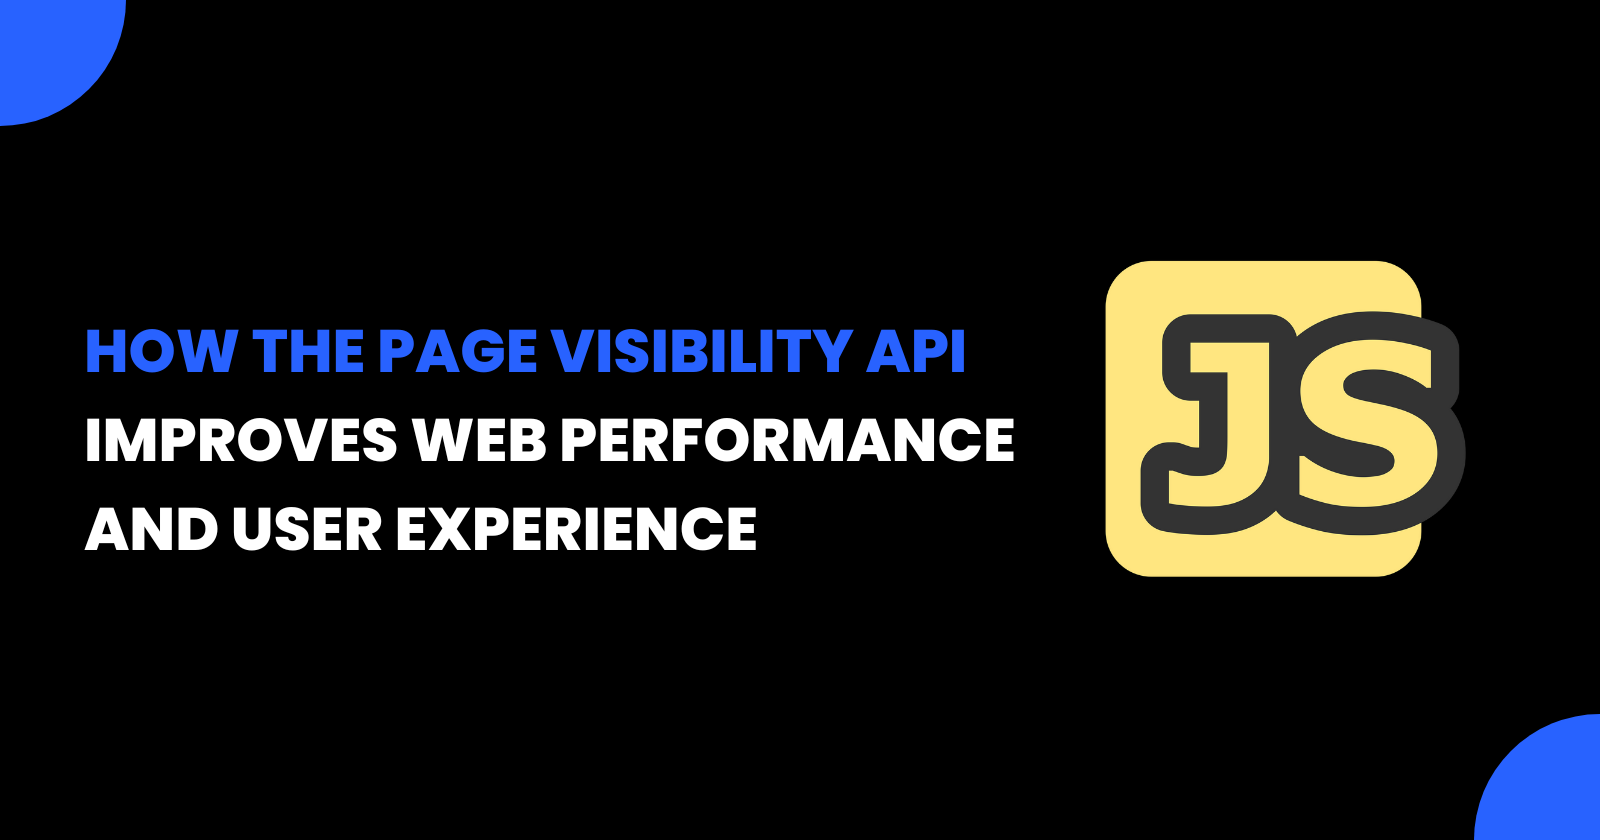 How the Page Visibility API Improves Web Performance and User Experience